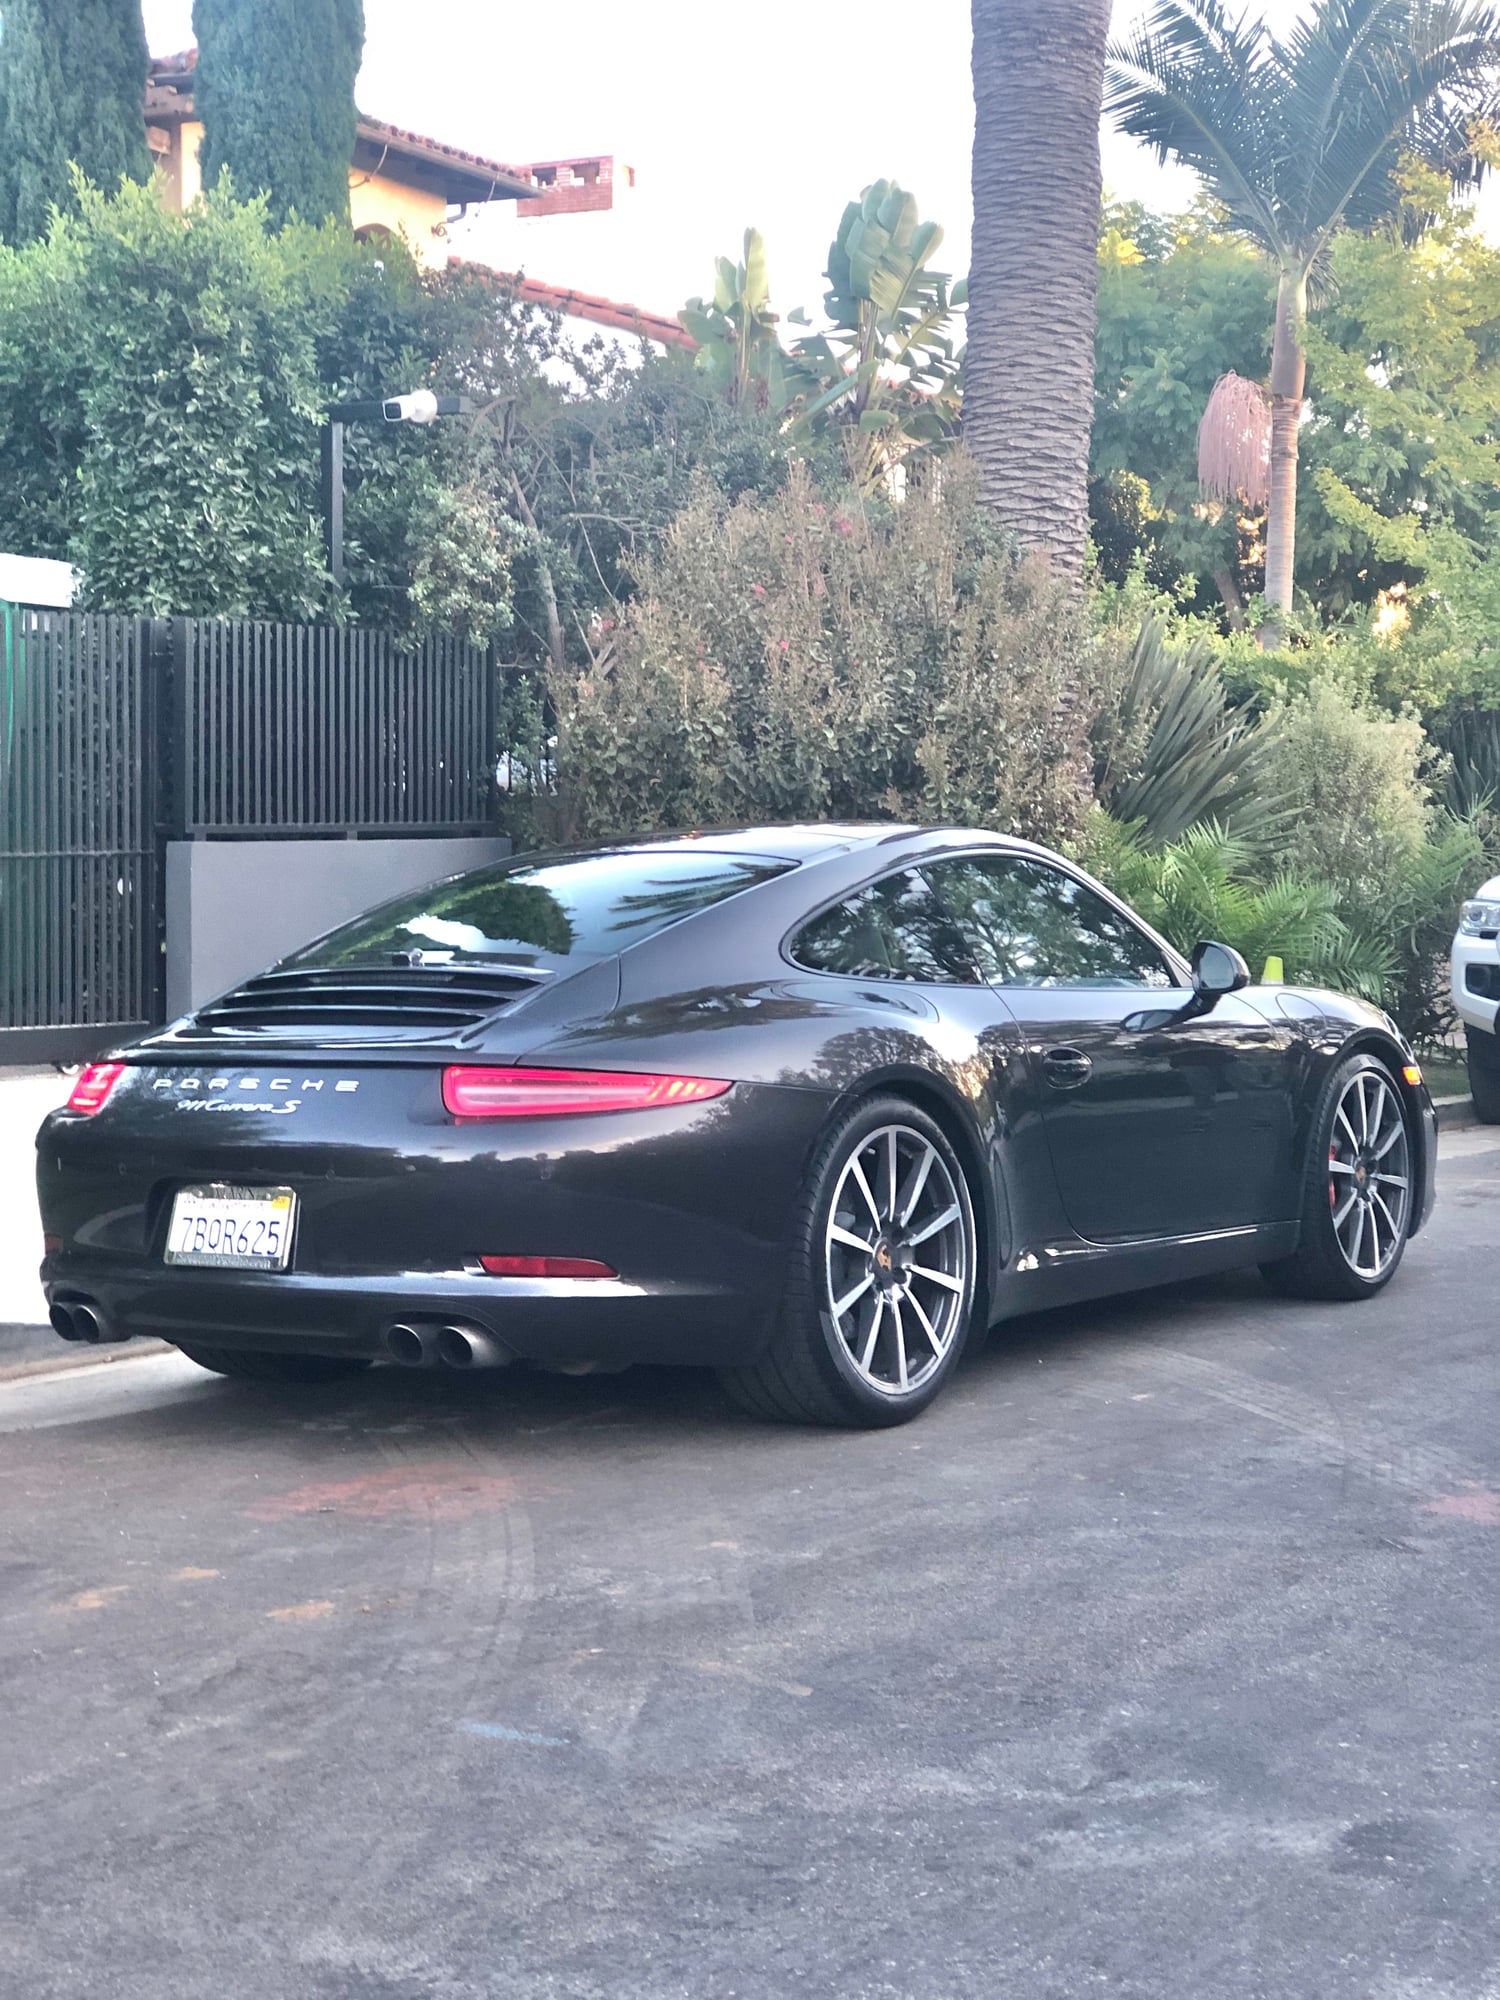 2013 Porsche 911 - Porshe 911S-Like New Barely Driven! 29K miles.  ($77,500) - Used - VIN WP0AB2A91DS122903 - 30,000 Miles - 6 cyl - 2WD - Coupe - Los Angeles, CA 90049, United States